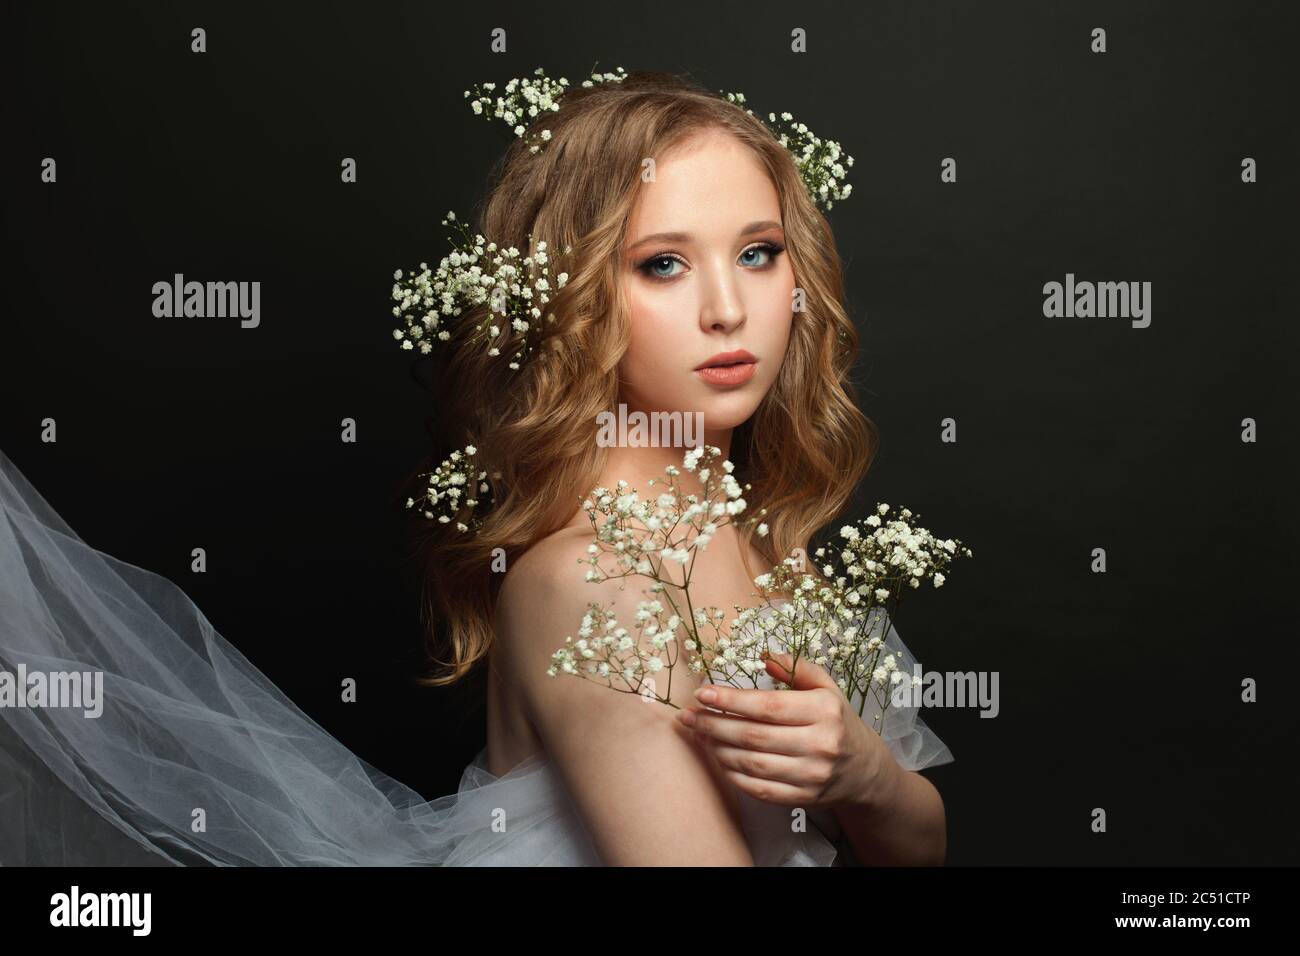 Fiancee girl with long healthy curly hair and white flowers on black background Stock Photo